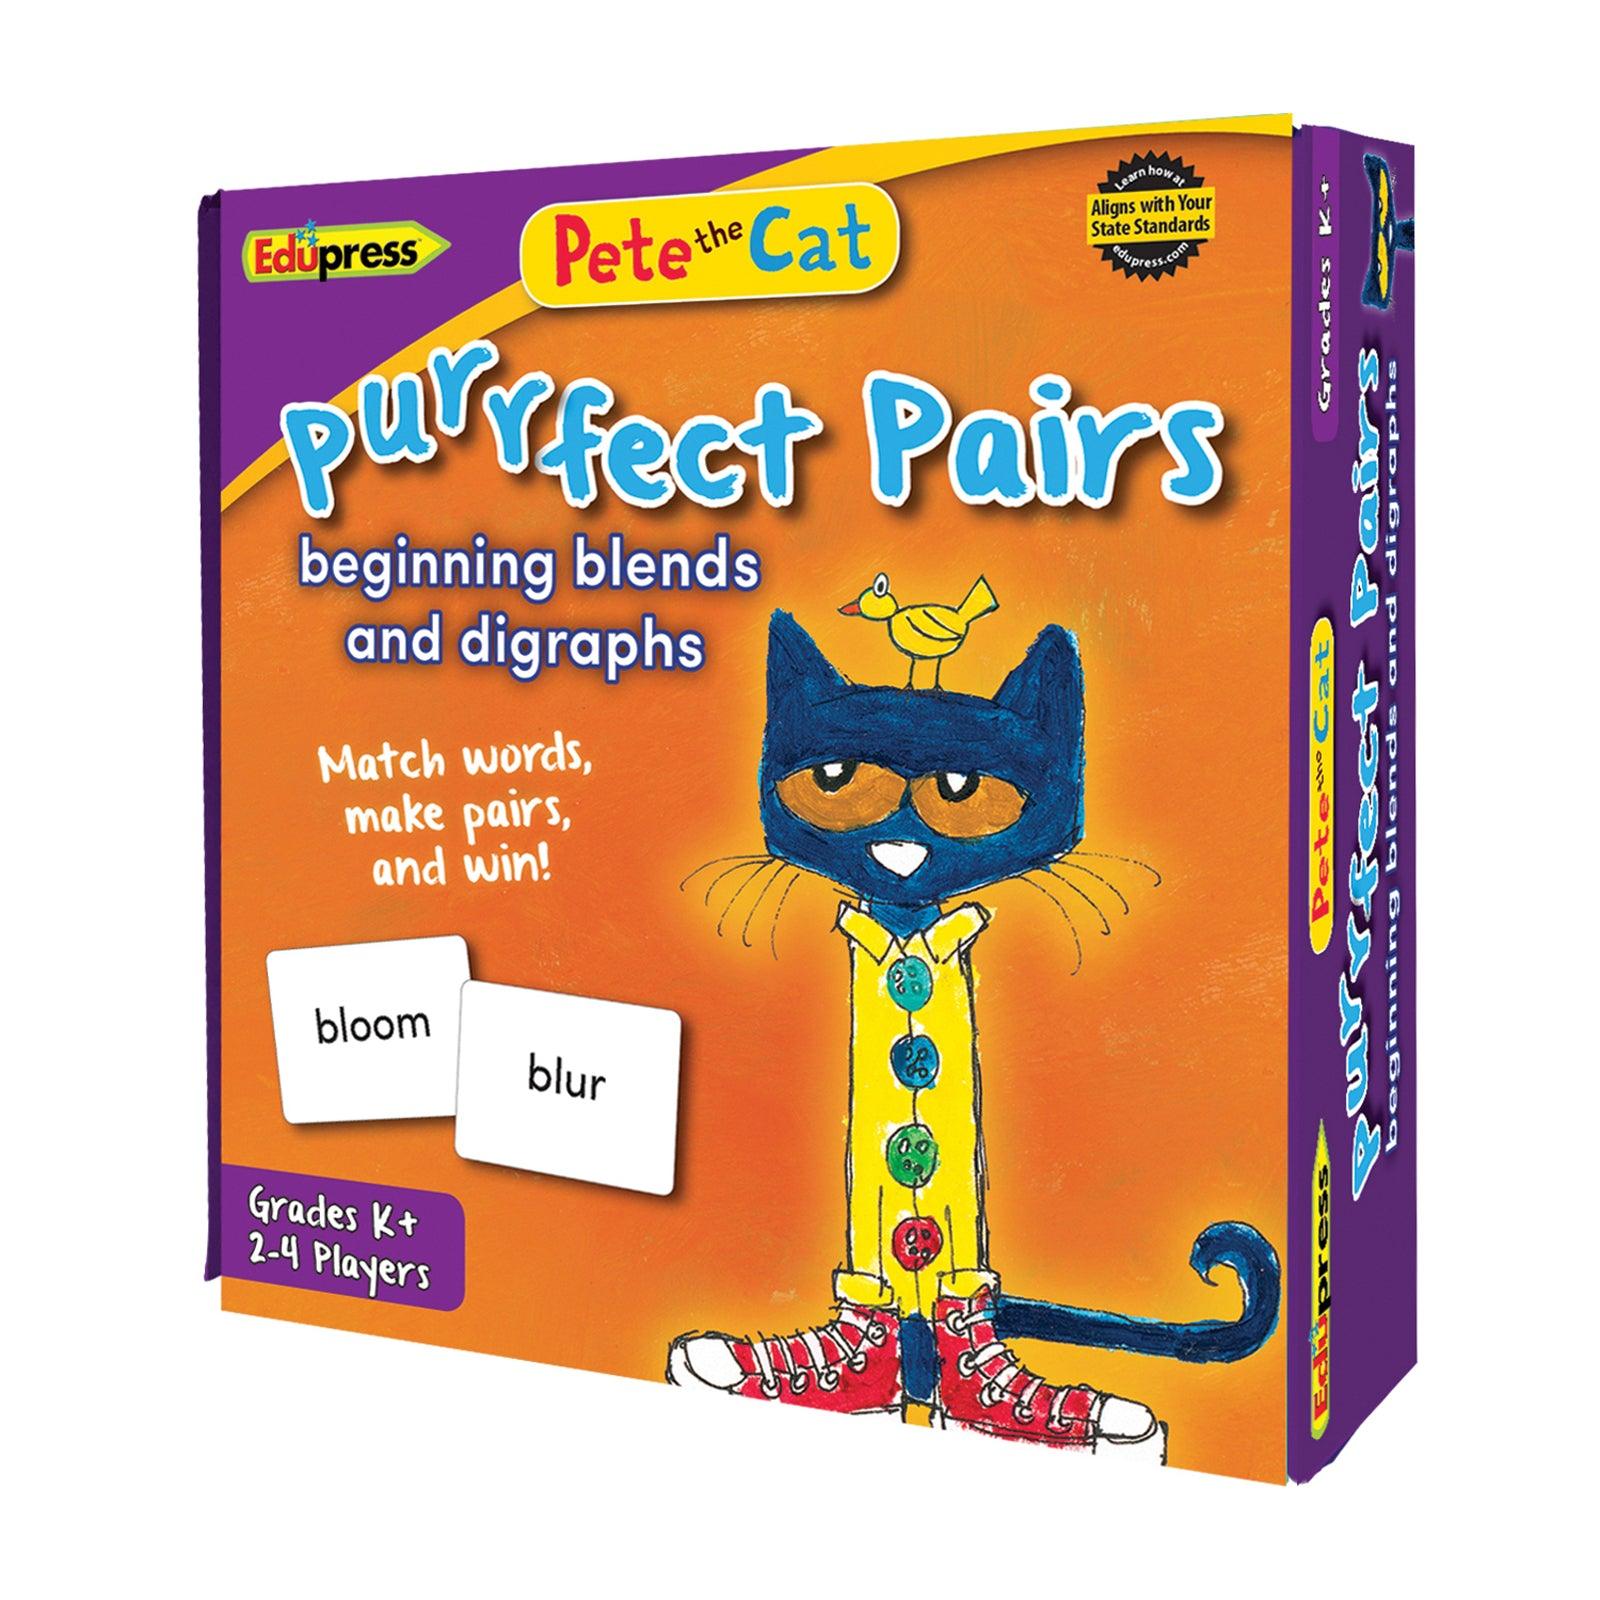 Pete the Cat® Purrfect Pairs Game Beginning Blends and Digraphs - Loomini